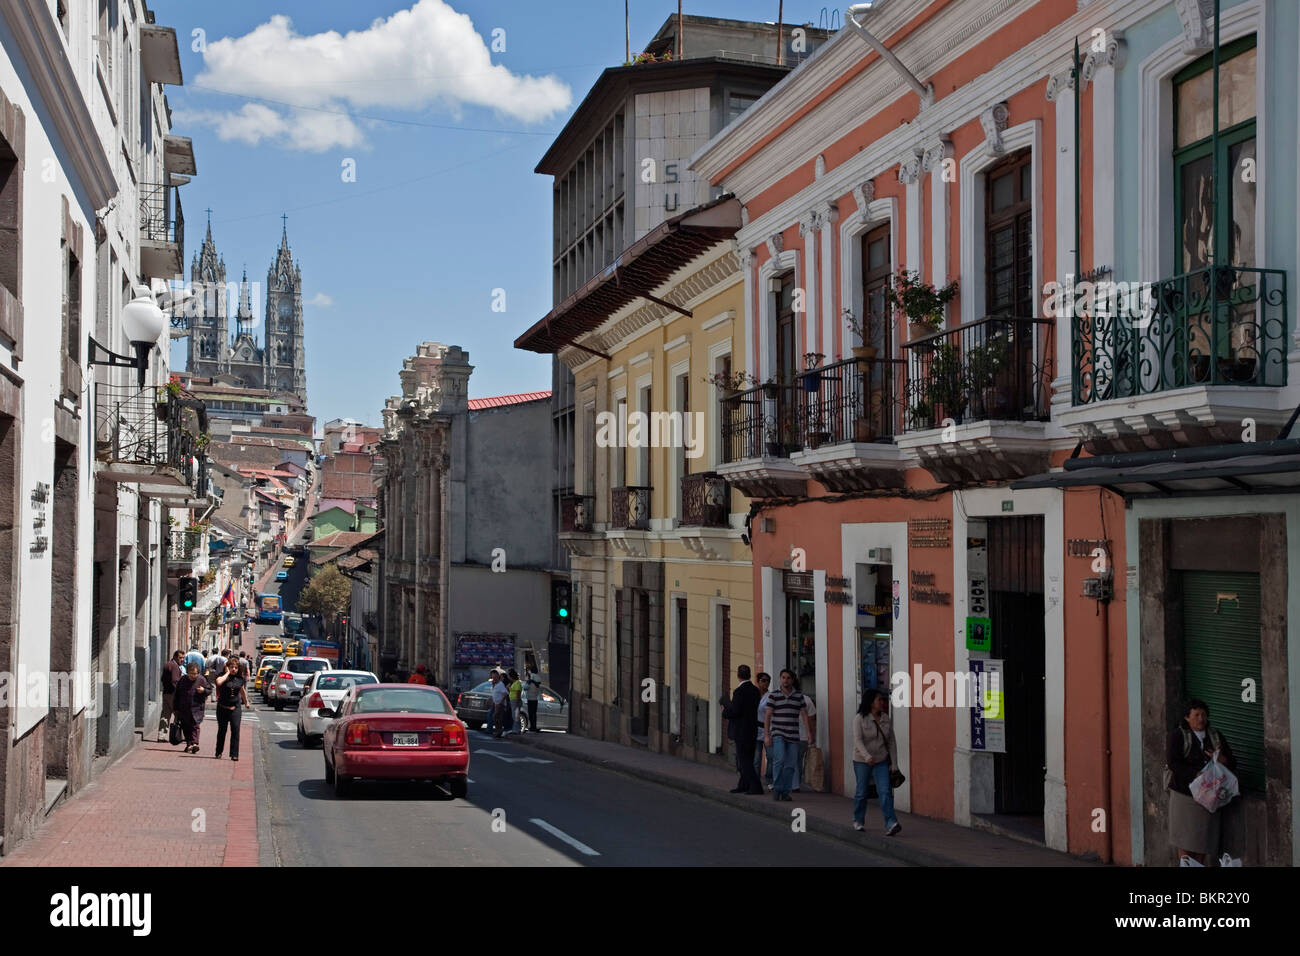 Ecuador, A street scene in the centre of Quito, Catholic Cathedral the background. Stock Photo